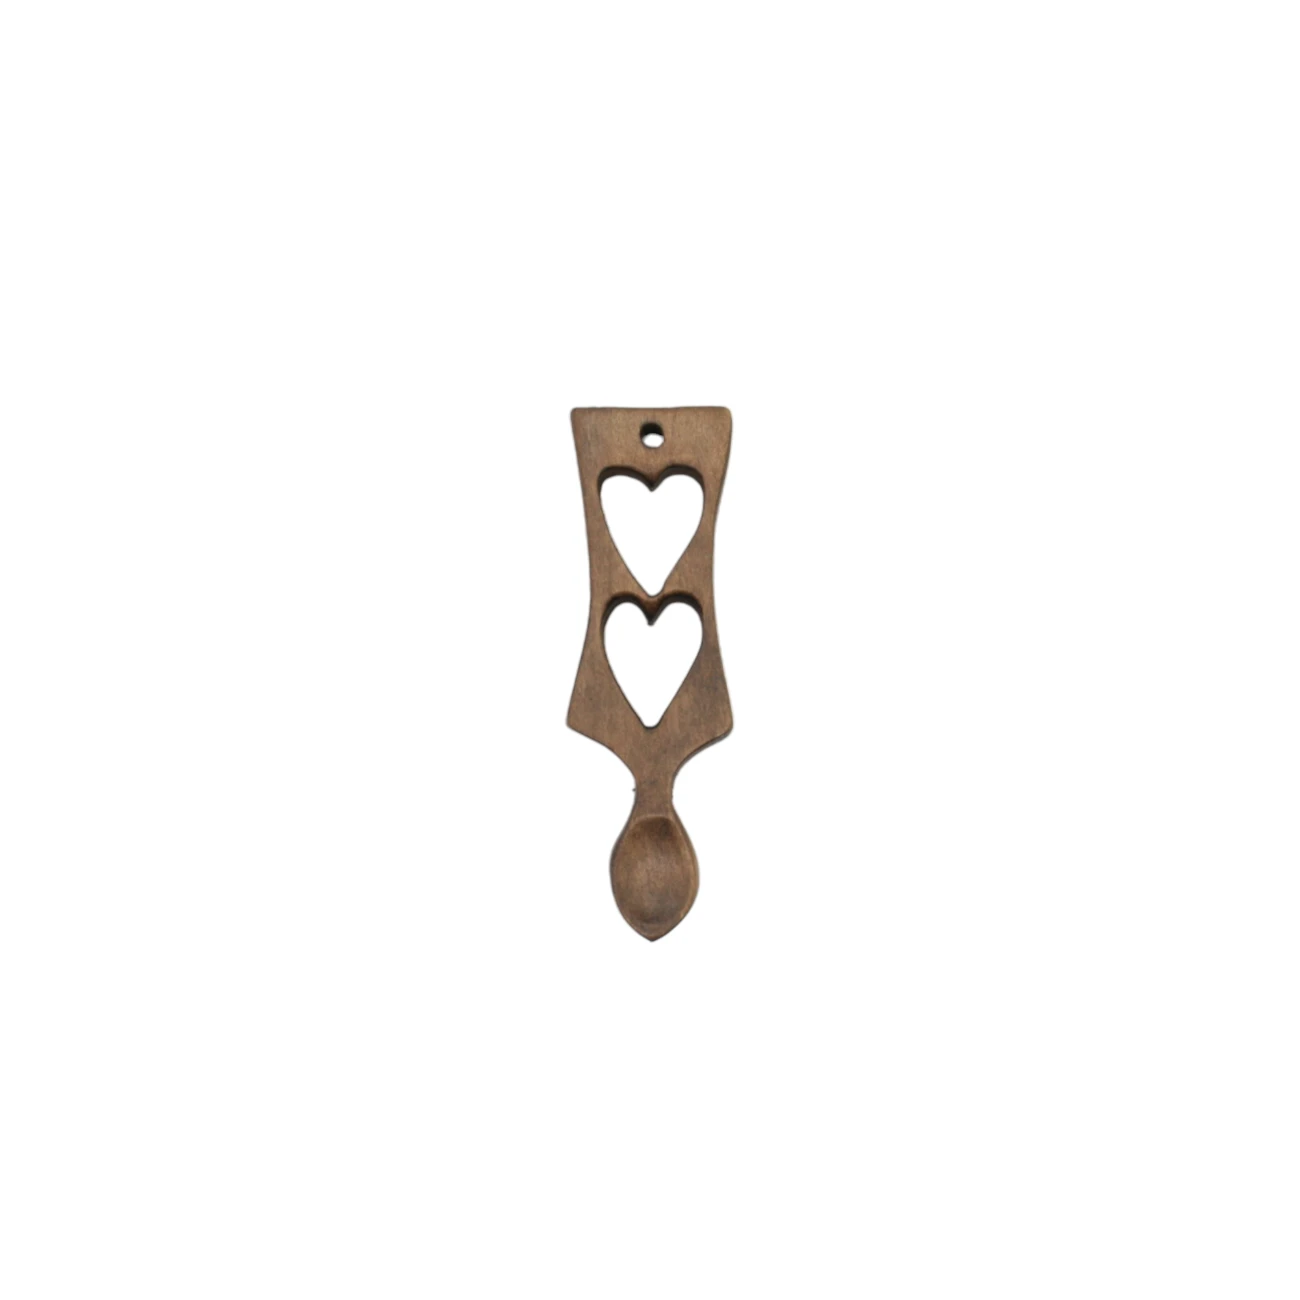 An image of a lovespoon titled Small Hearts